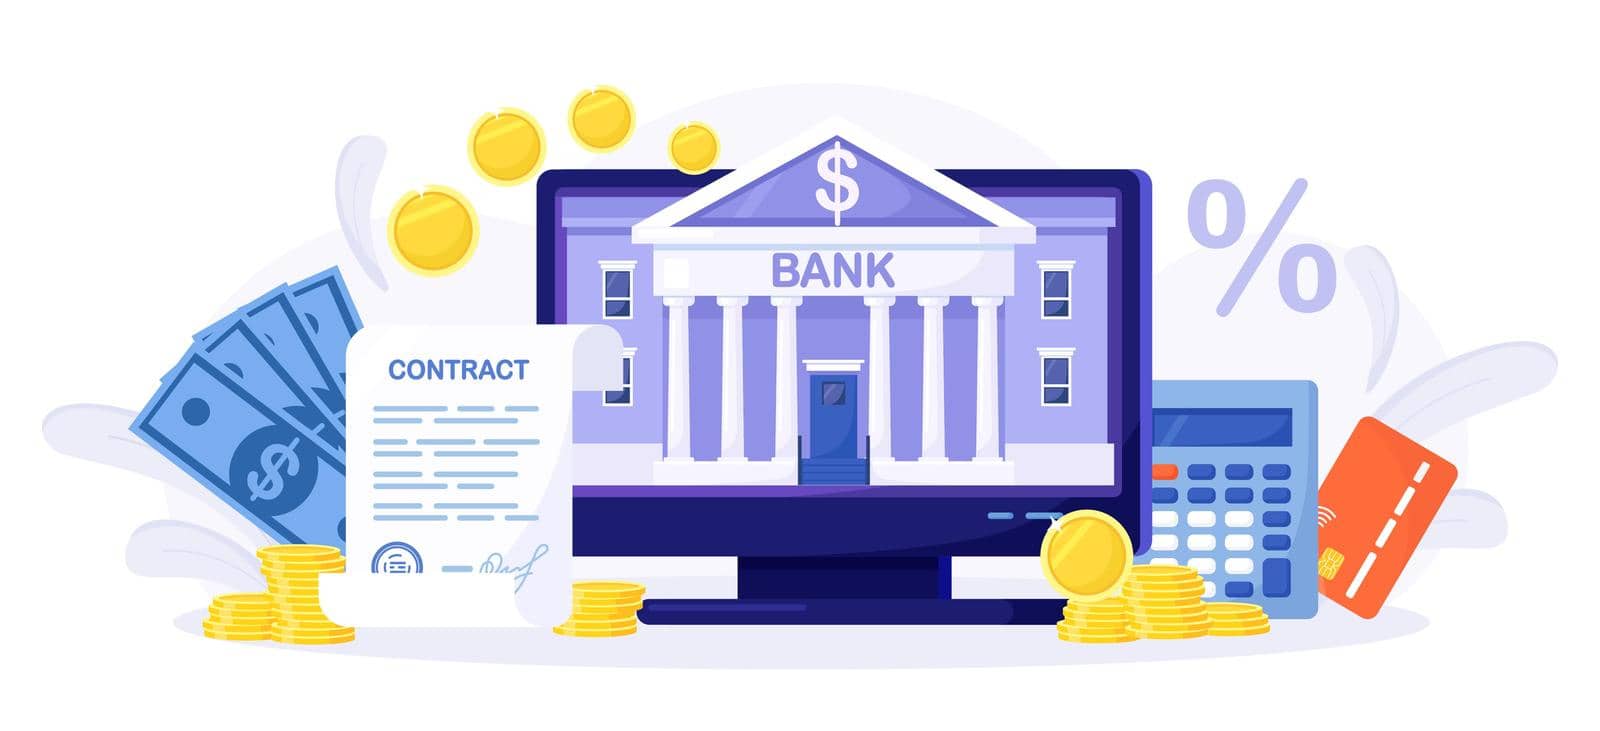 Mobile banking and internet payment. Online bank agreement. Loan contract. Financial building on computer screen. Banking Operation. Financial transactions, payments, money transfers and bank account by TanushkaBu